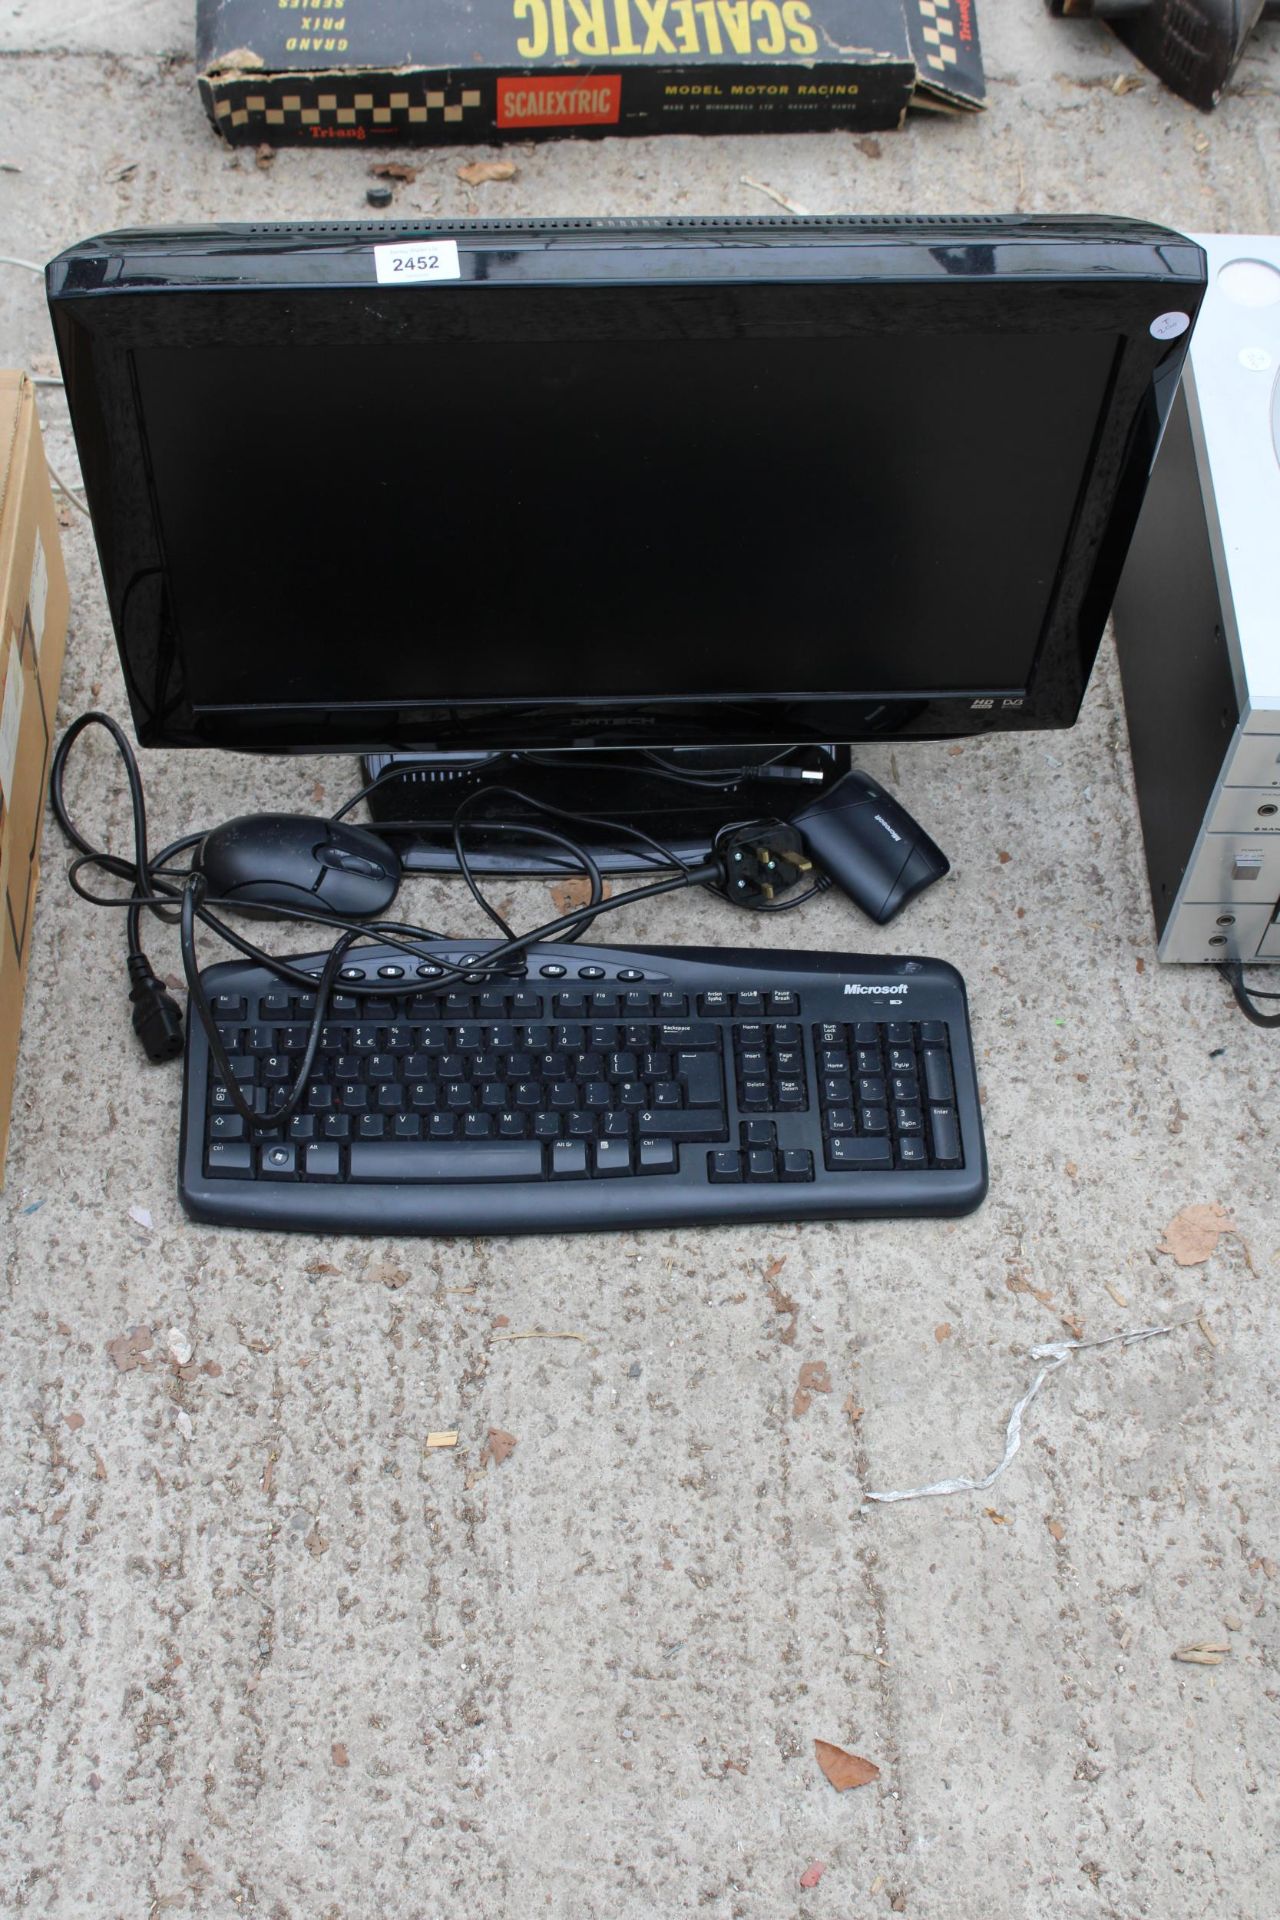 A DMTECH TELEVISION, A COMPUTER KEYBOARD AND MOUSE